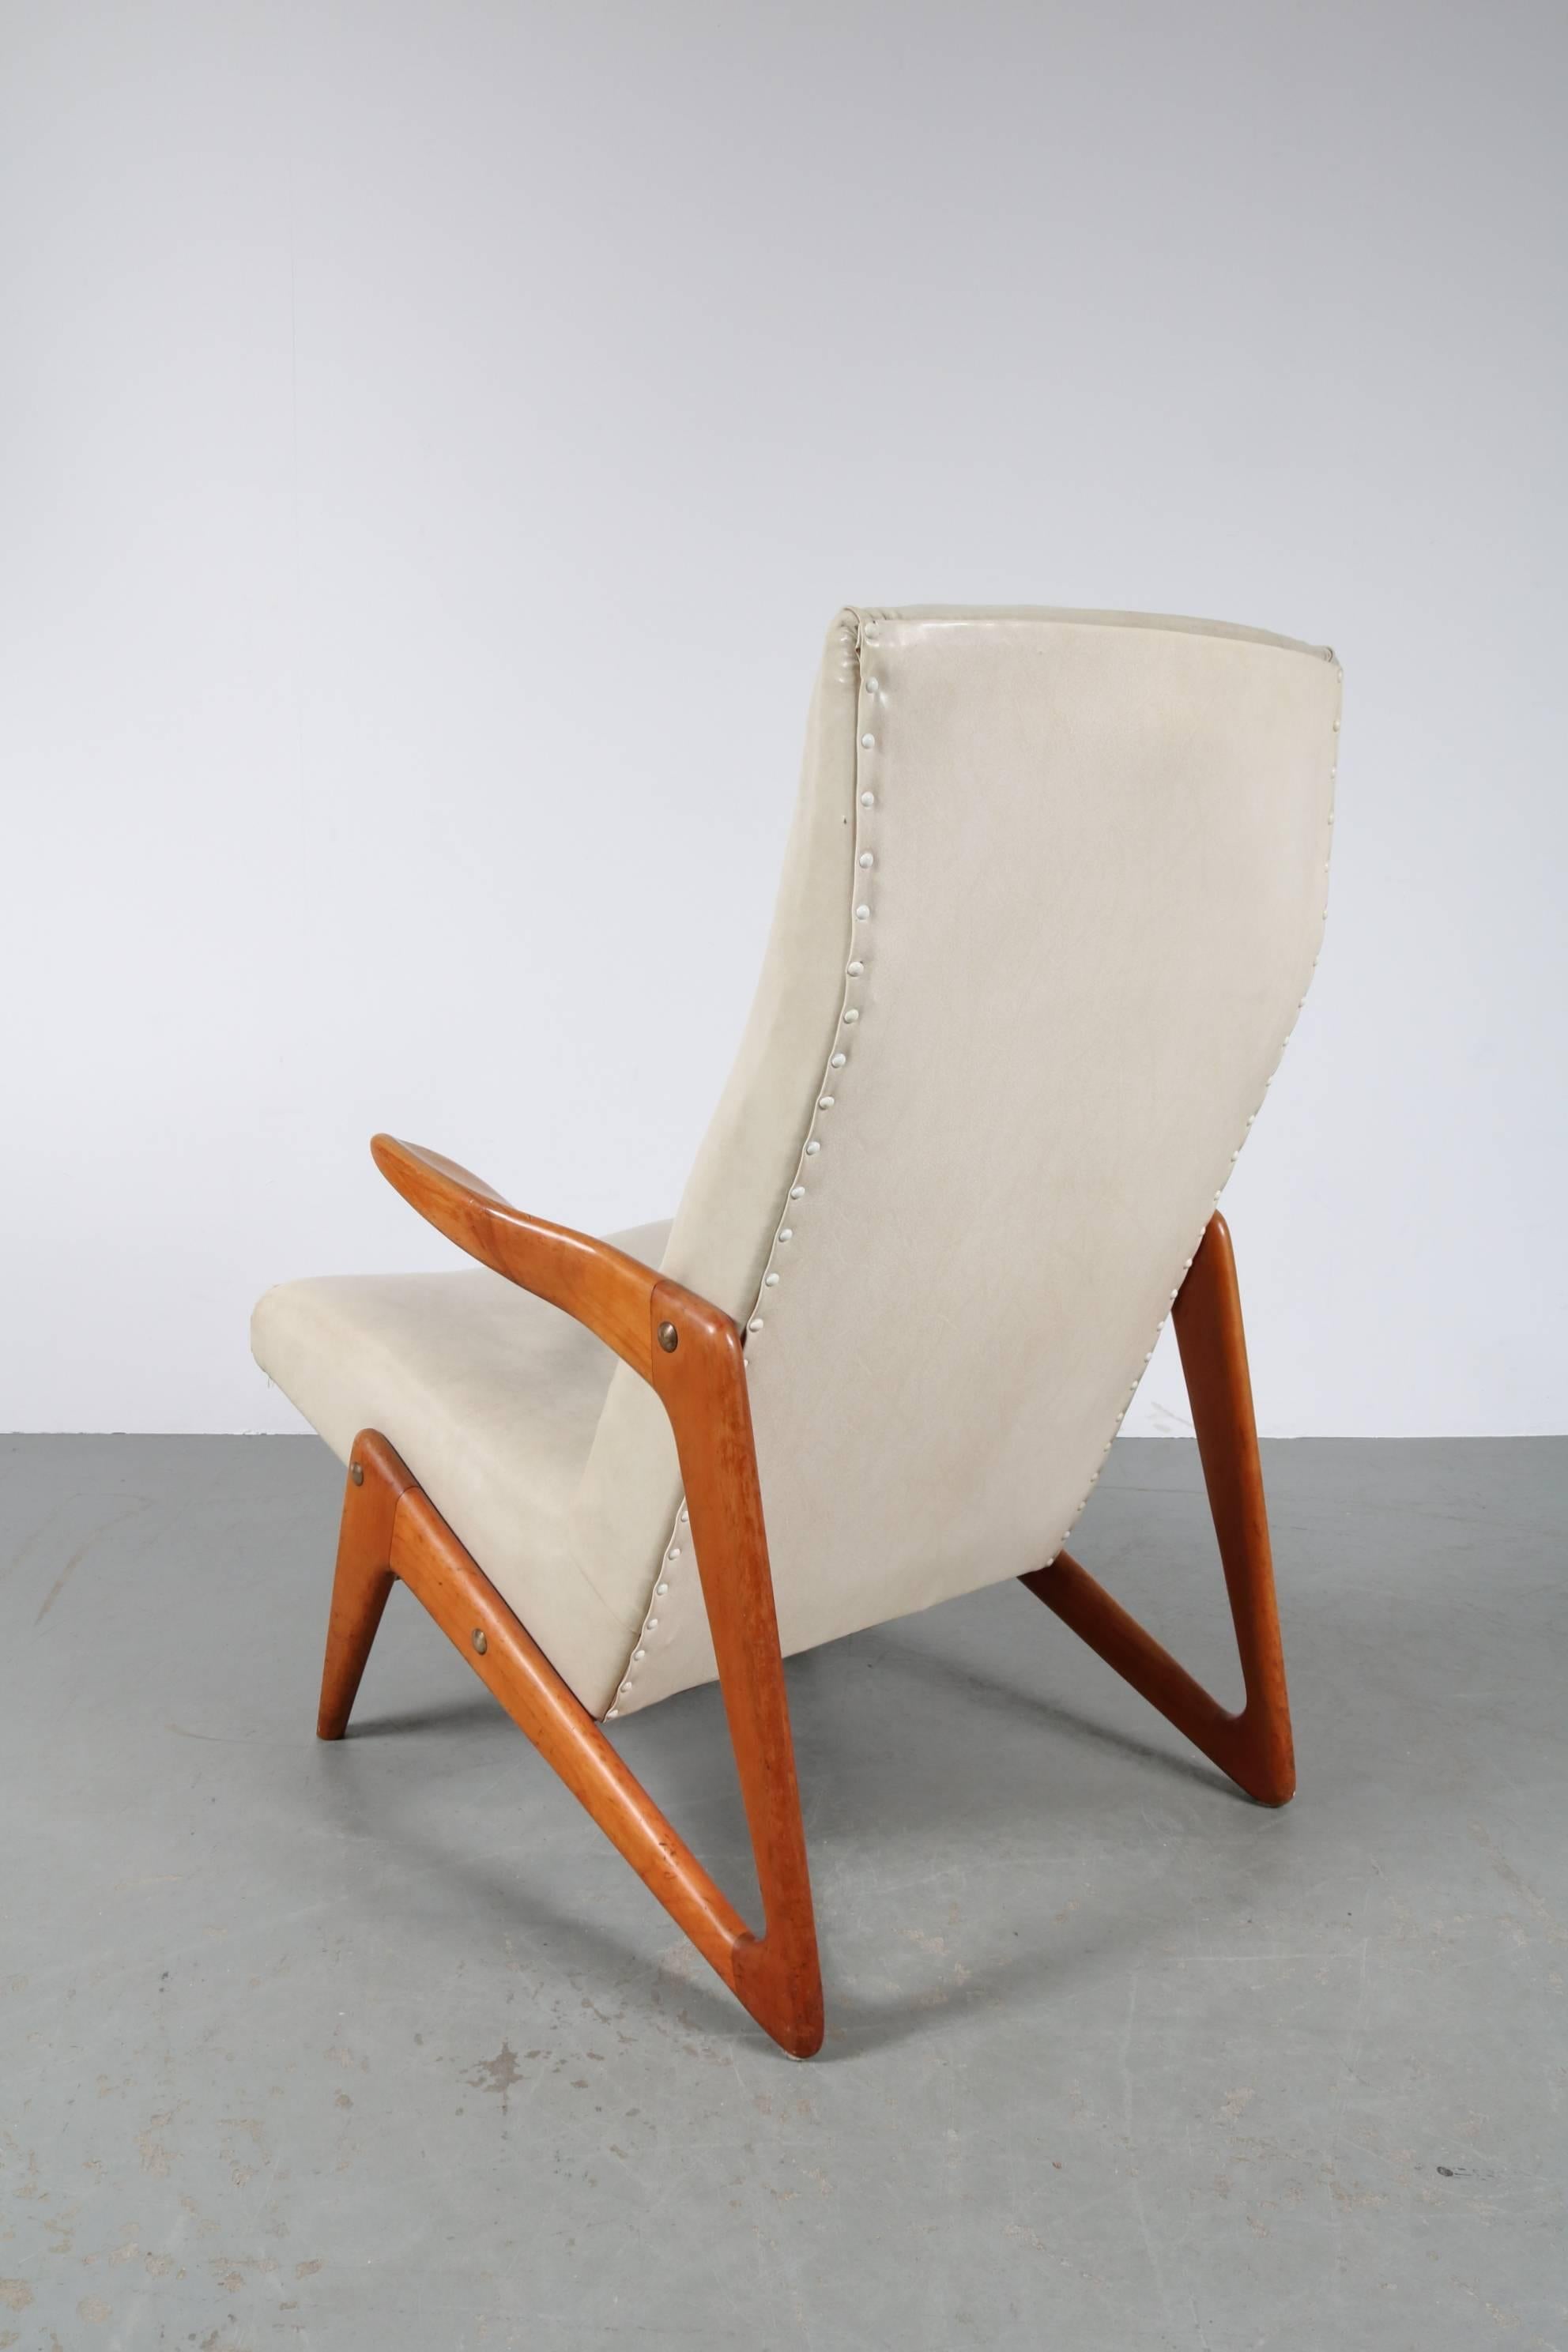 Eye-catching lounge chair, attributed to Alfred Hendrickx for Belform in Belgium, 1950s.

The chair has a very nicely designed walnut wooden base, creating a unique appearance from every angle. The comfortable seat is uphostered in the original